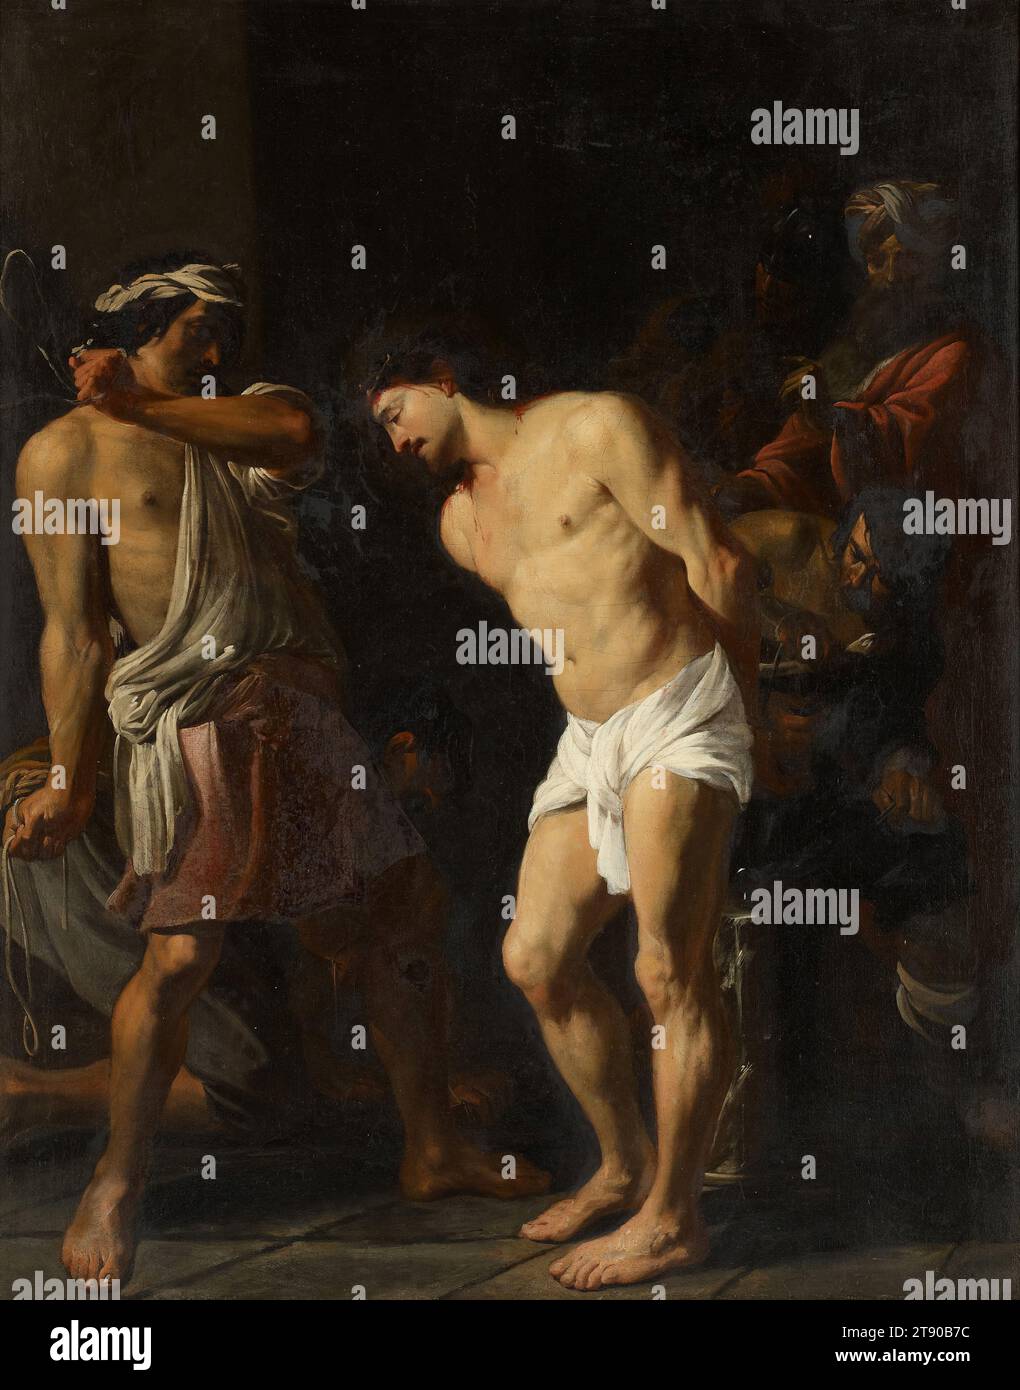 Flagellation of Christ, 17th century, Attributed to Jacques Blanchard, French, 1600 - 1638, 29 7/8 x 23 3/4 in. (75.88 x 60.33 cm) (sight)36 1/4 x 30 1/4 in. (92.08 x 76.84 cm) (outer frame), Oil on canvas, France, 17th century Stock Photo